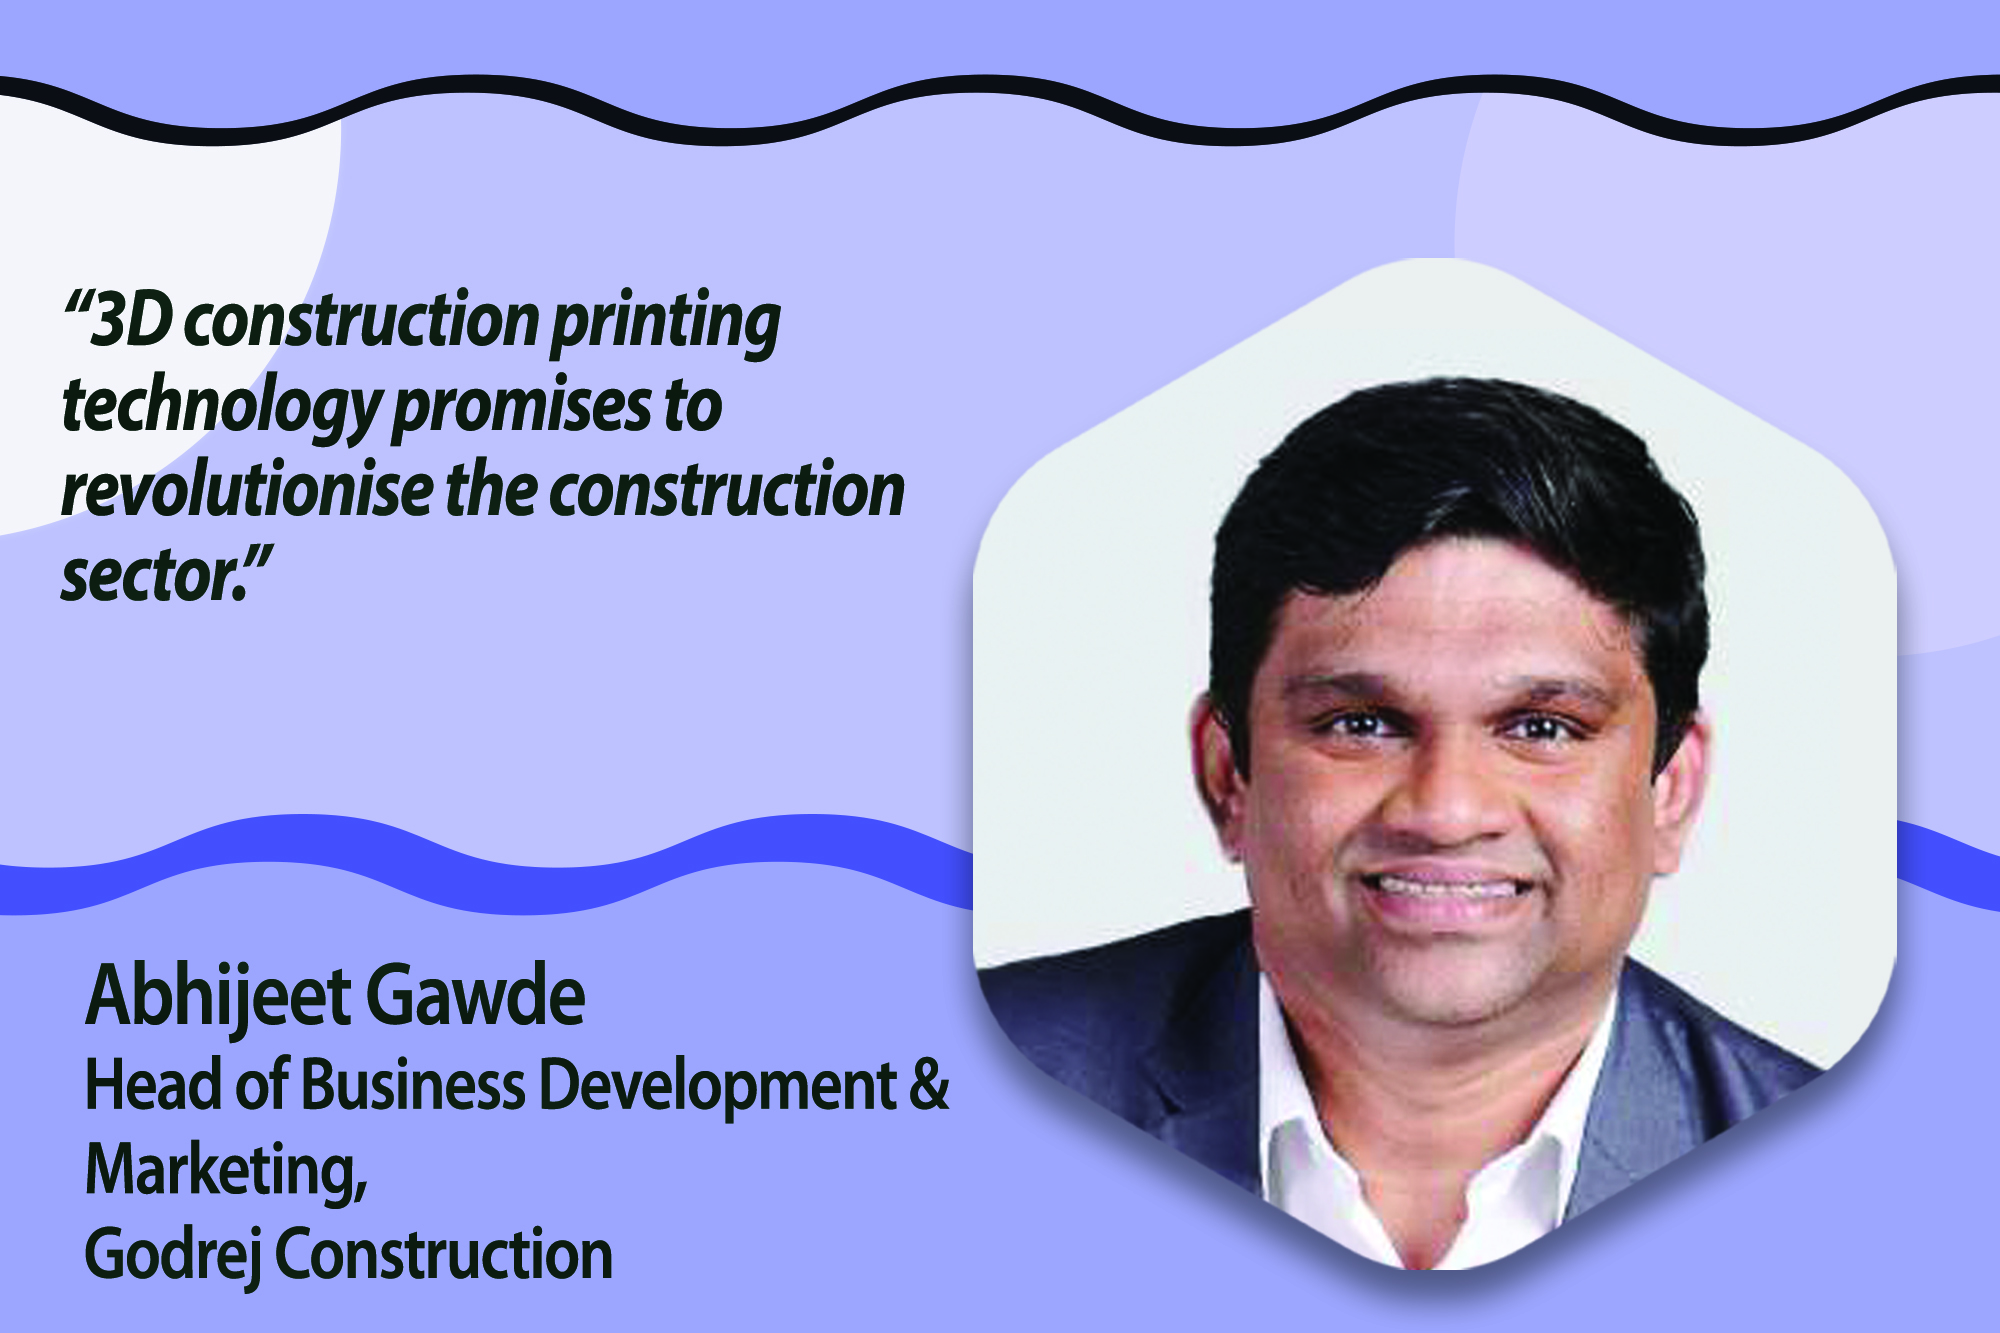 As the construction industry embraces a digital revolution, the emergence of 3D printing technology is reshaping traditional methodologies. With its potential to optimise resource utilisation and minimise environmental impact, 3D printing represents a paradigm shift toward sustainable construction practices.